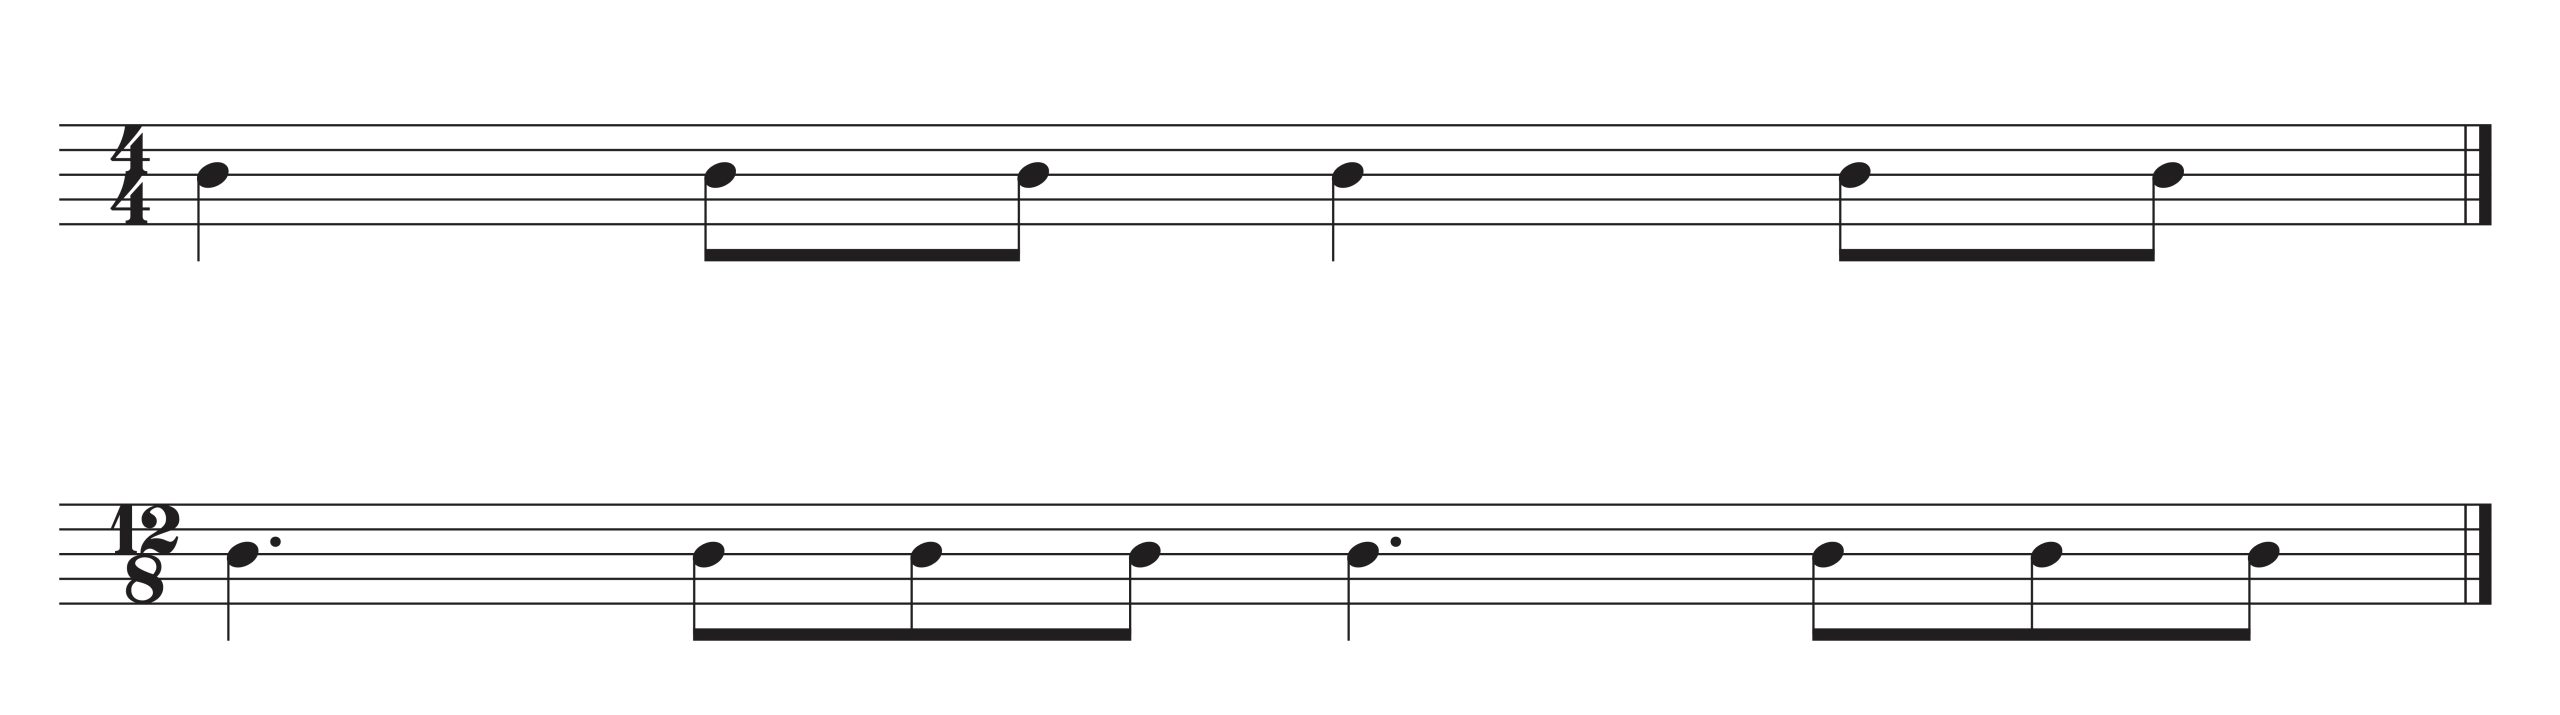 Two notated examples of beat divisions. One is in four-four meter and alternates quarter notes (beats) with pairs of eighth notes (beat divisions). The other is in twelve-eight meter and alternates dotted quarter notes (beats) with trios of eighth notes (beat divisions).